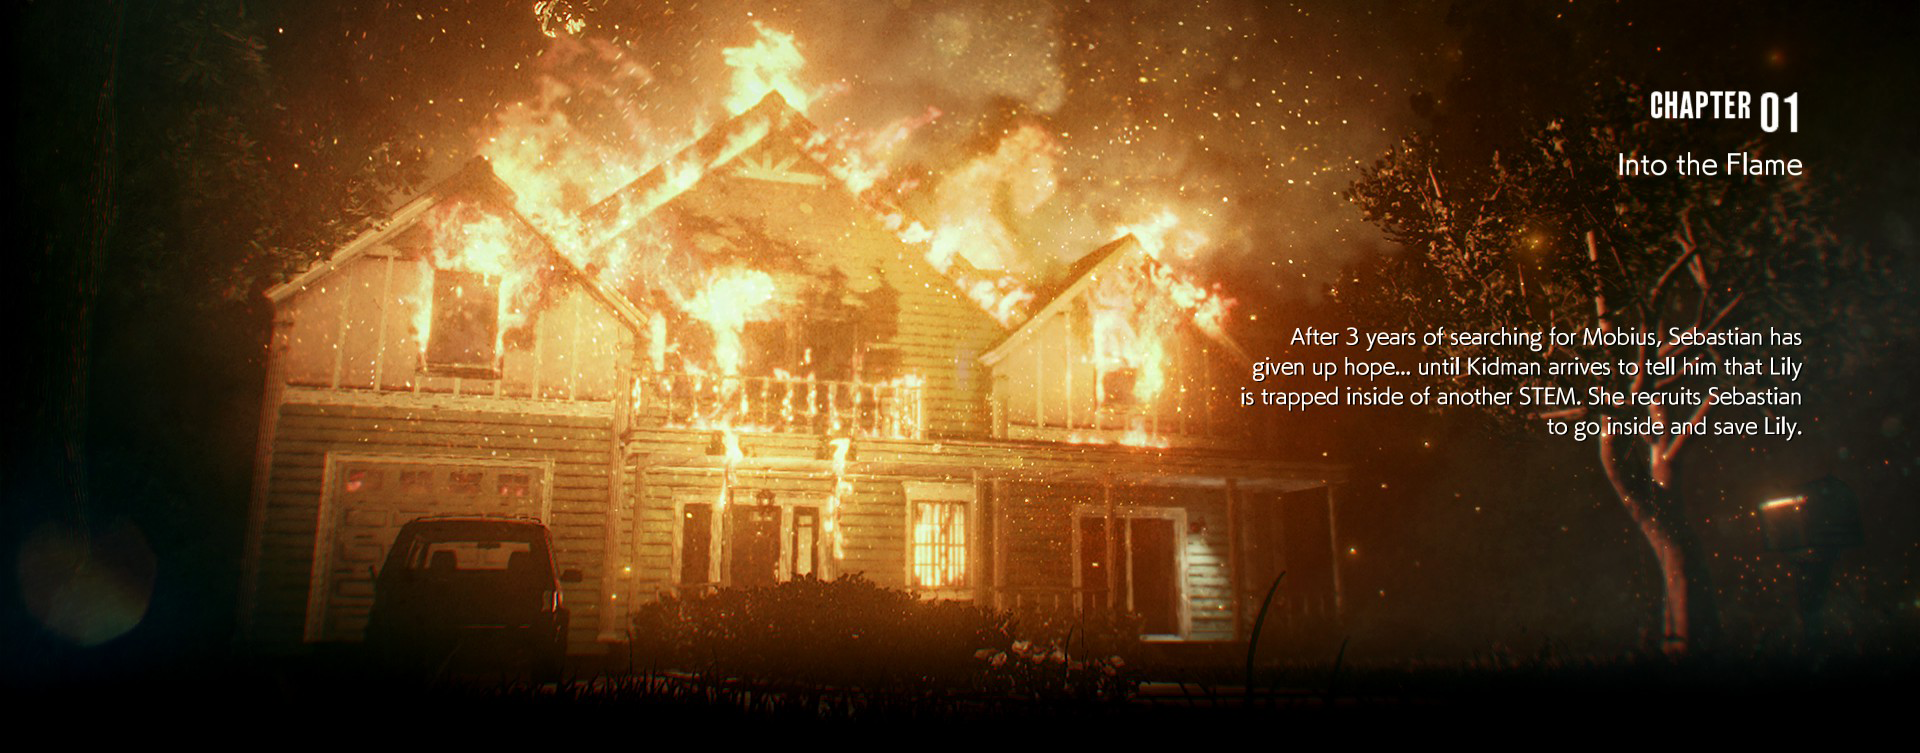 The Evil Within - Bathed in Flames Trophy / Achievement Guide